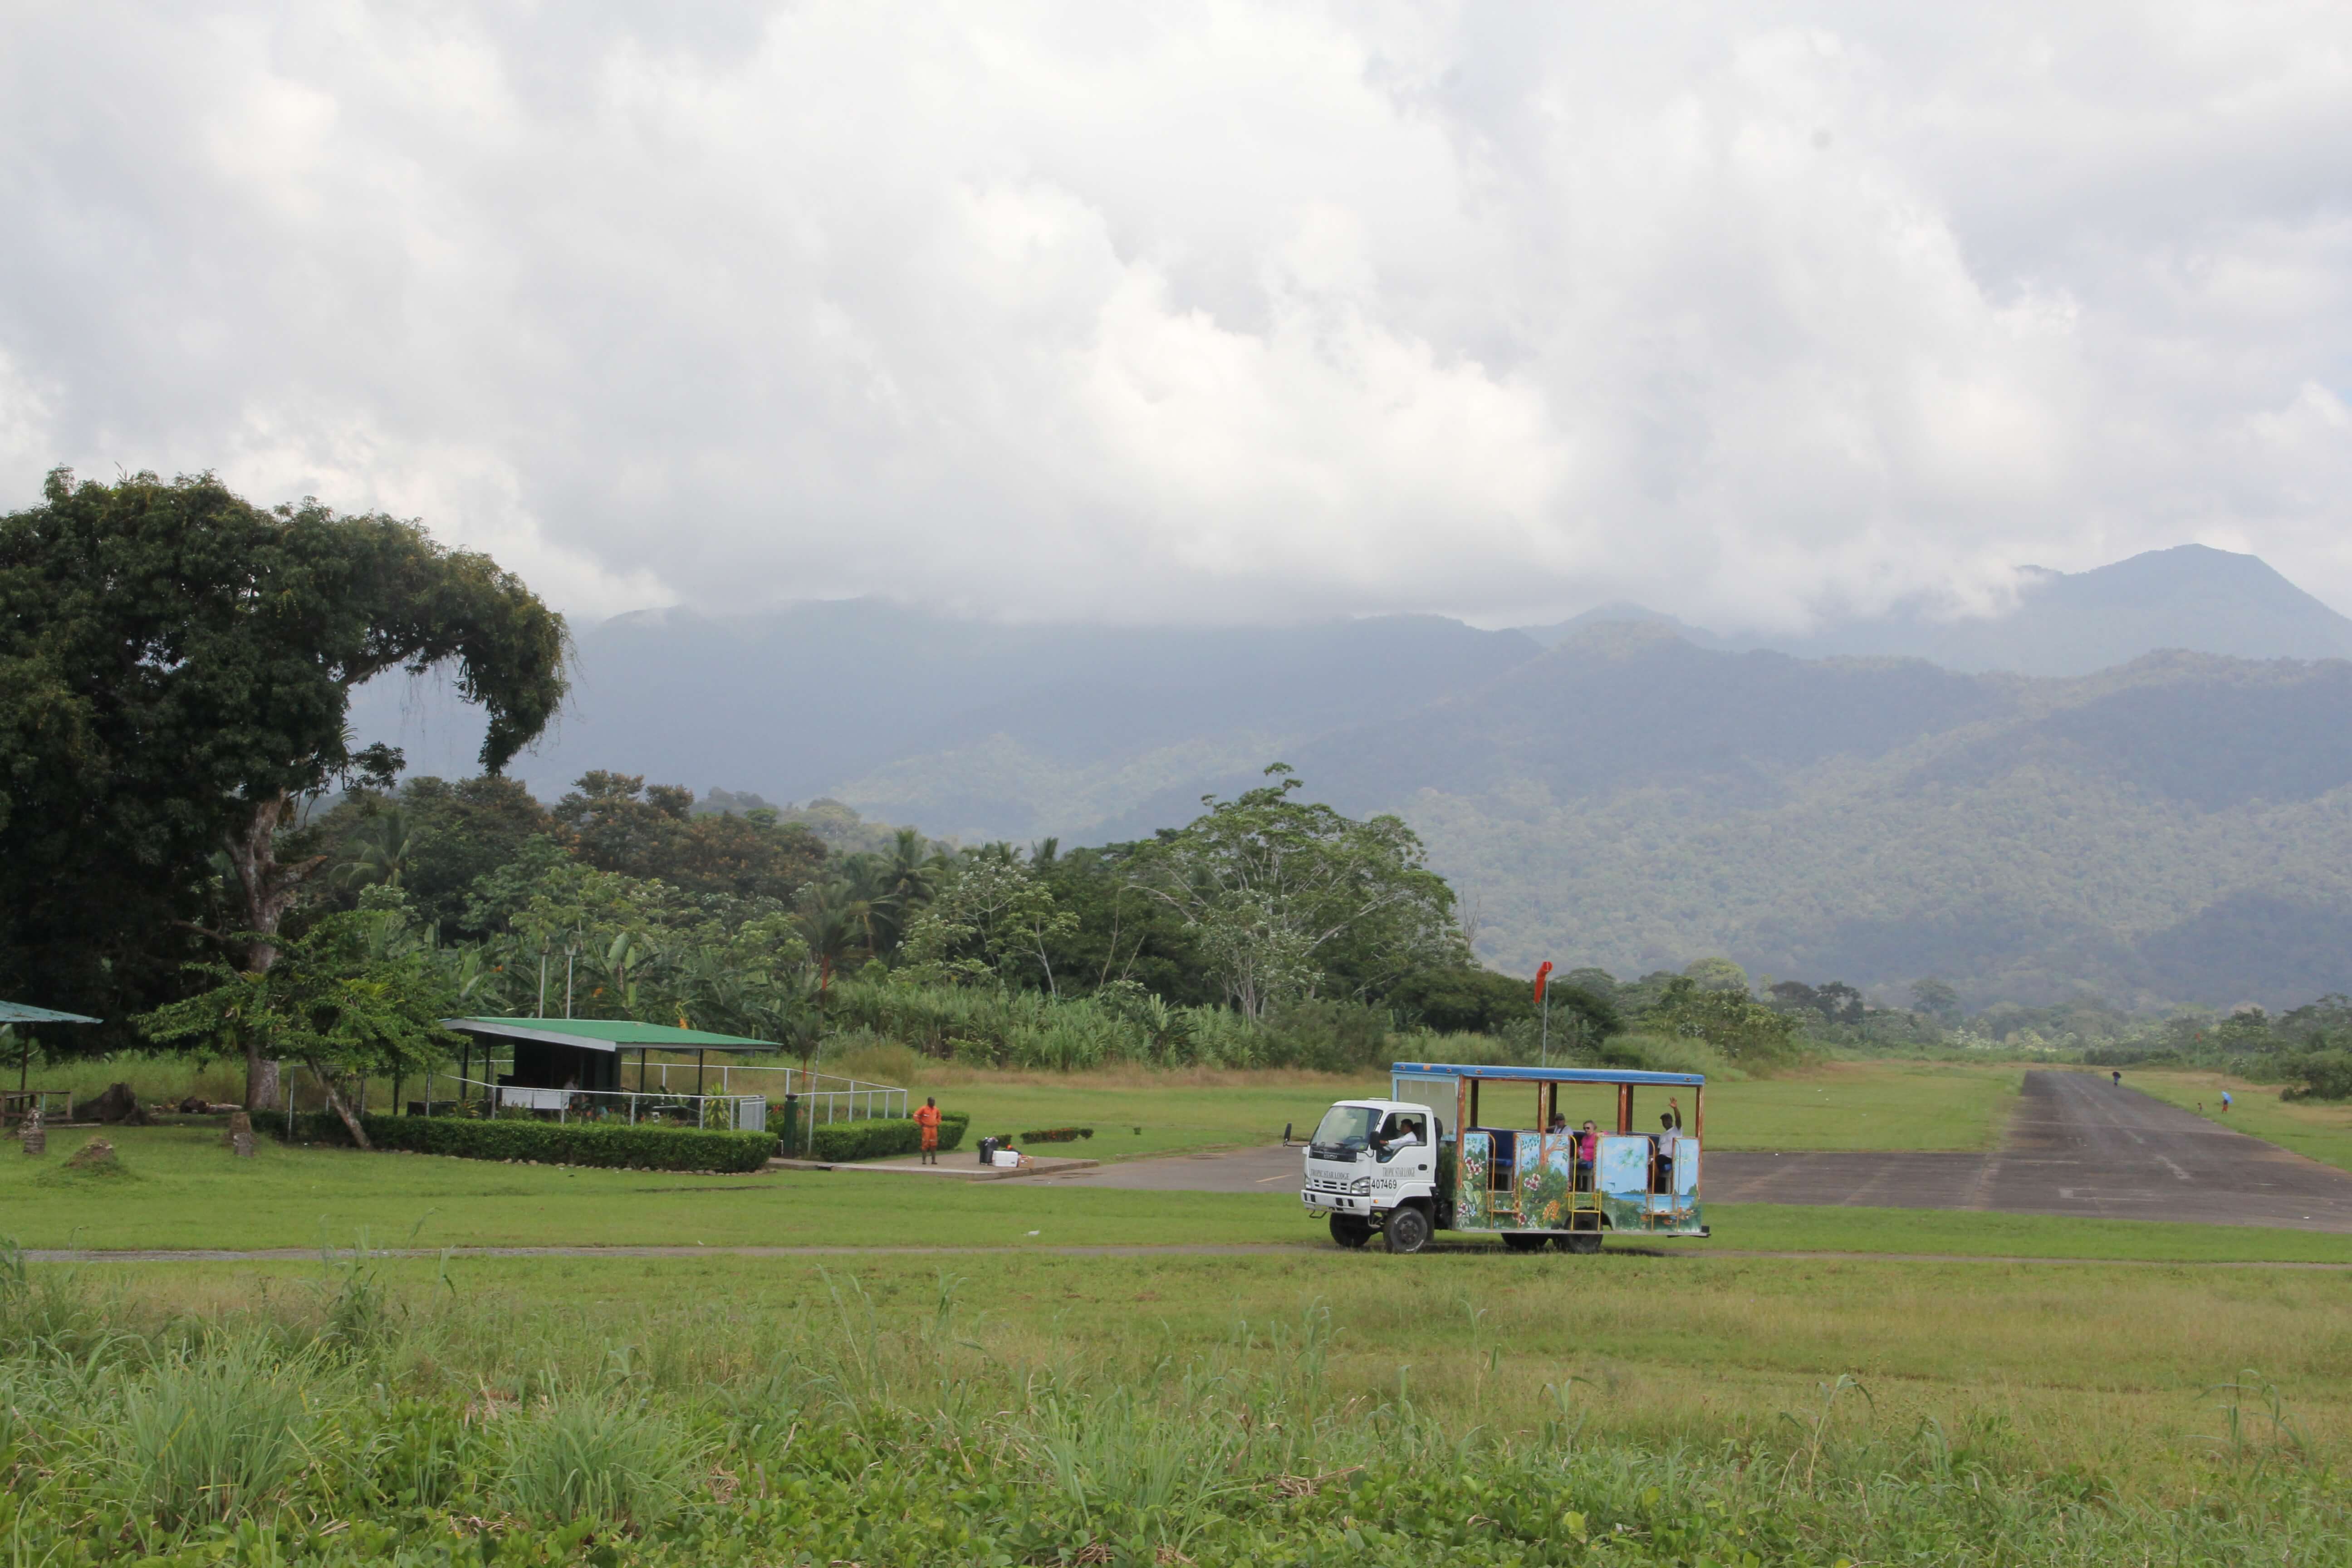 View of Airstrip with TSL bus in background